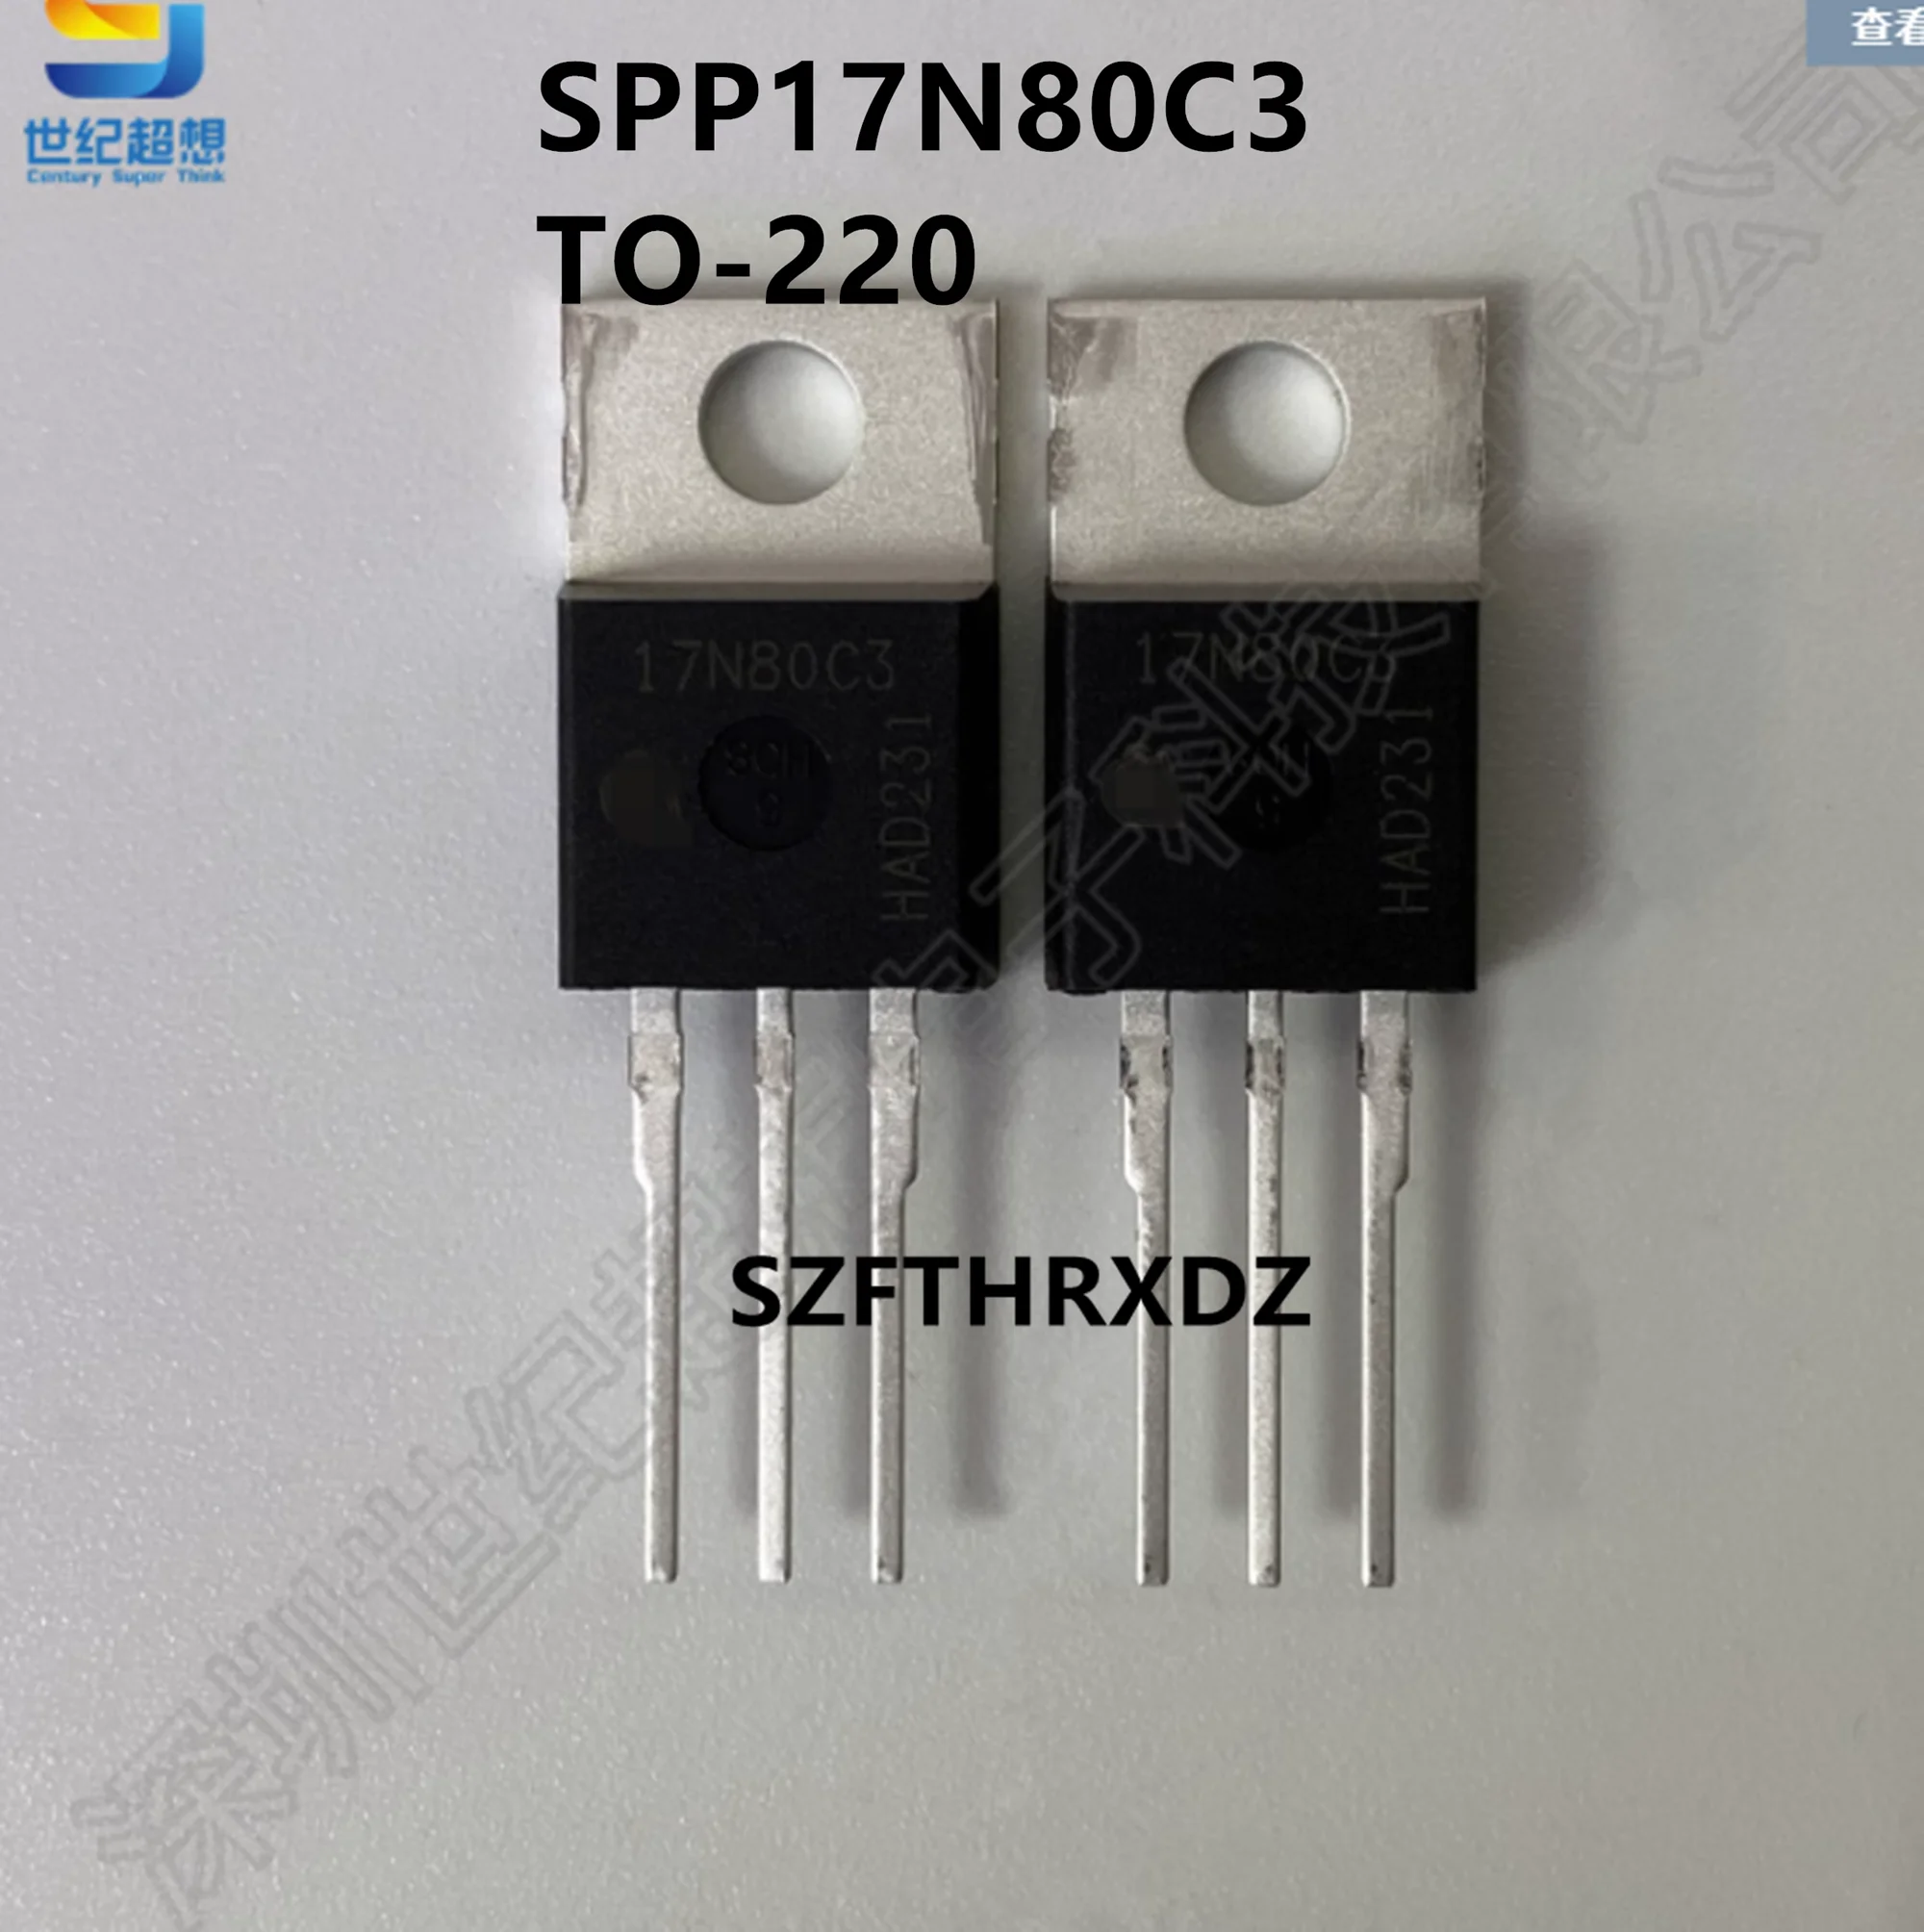 

10pcs 100% New Imported Original SPP17N80C3 17N80C3 Field effect transistor MOSFET 800V 17A TO-220